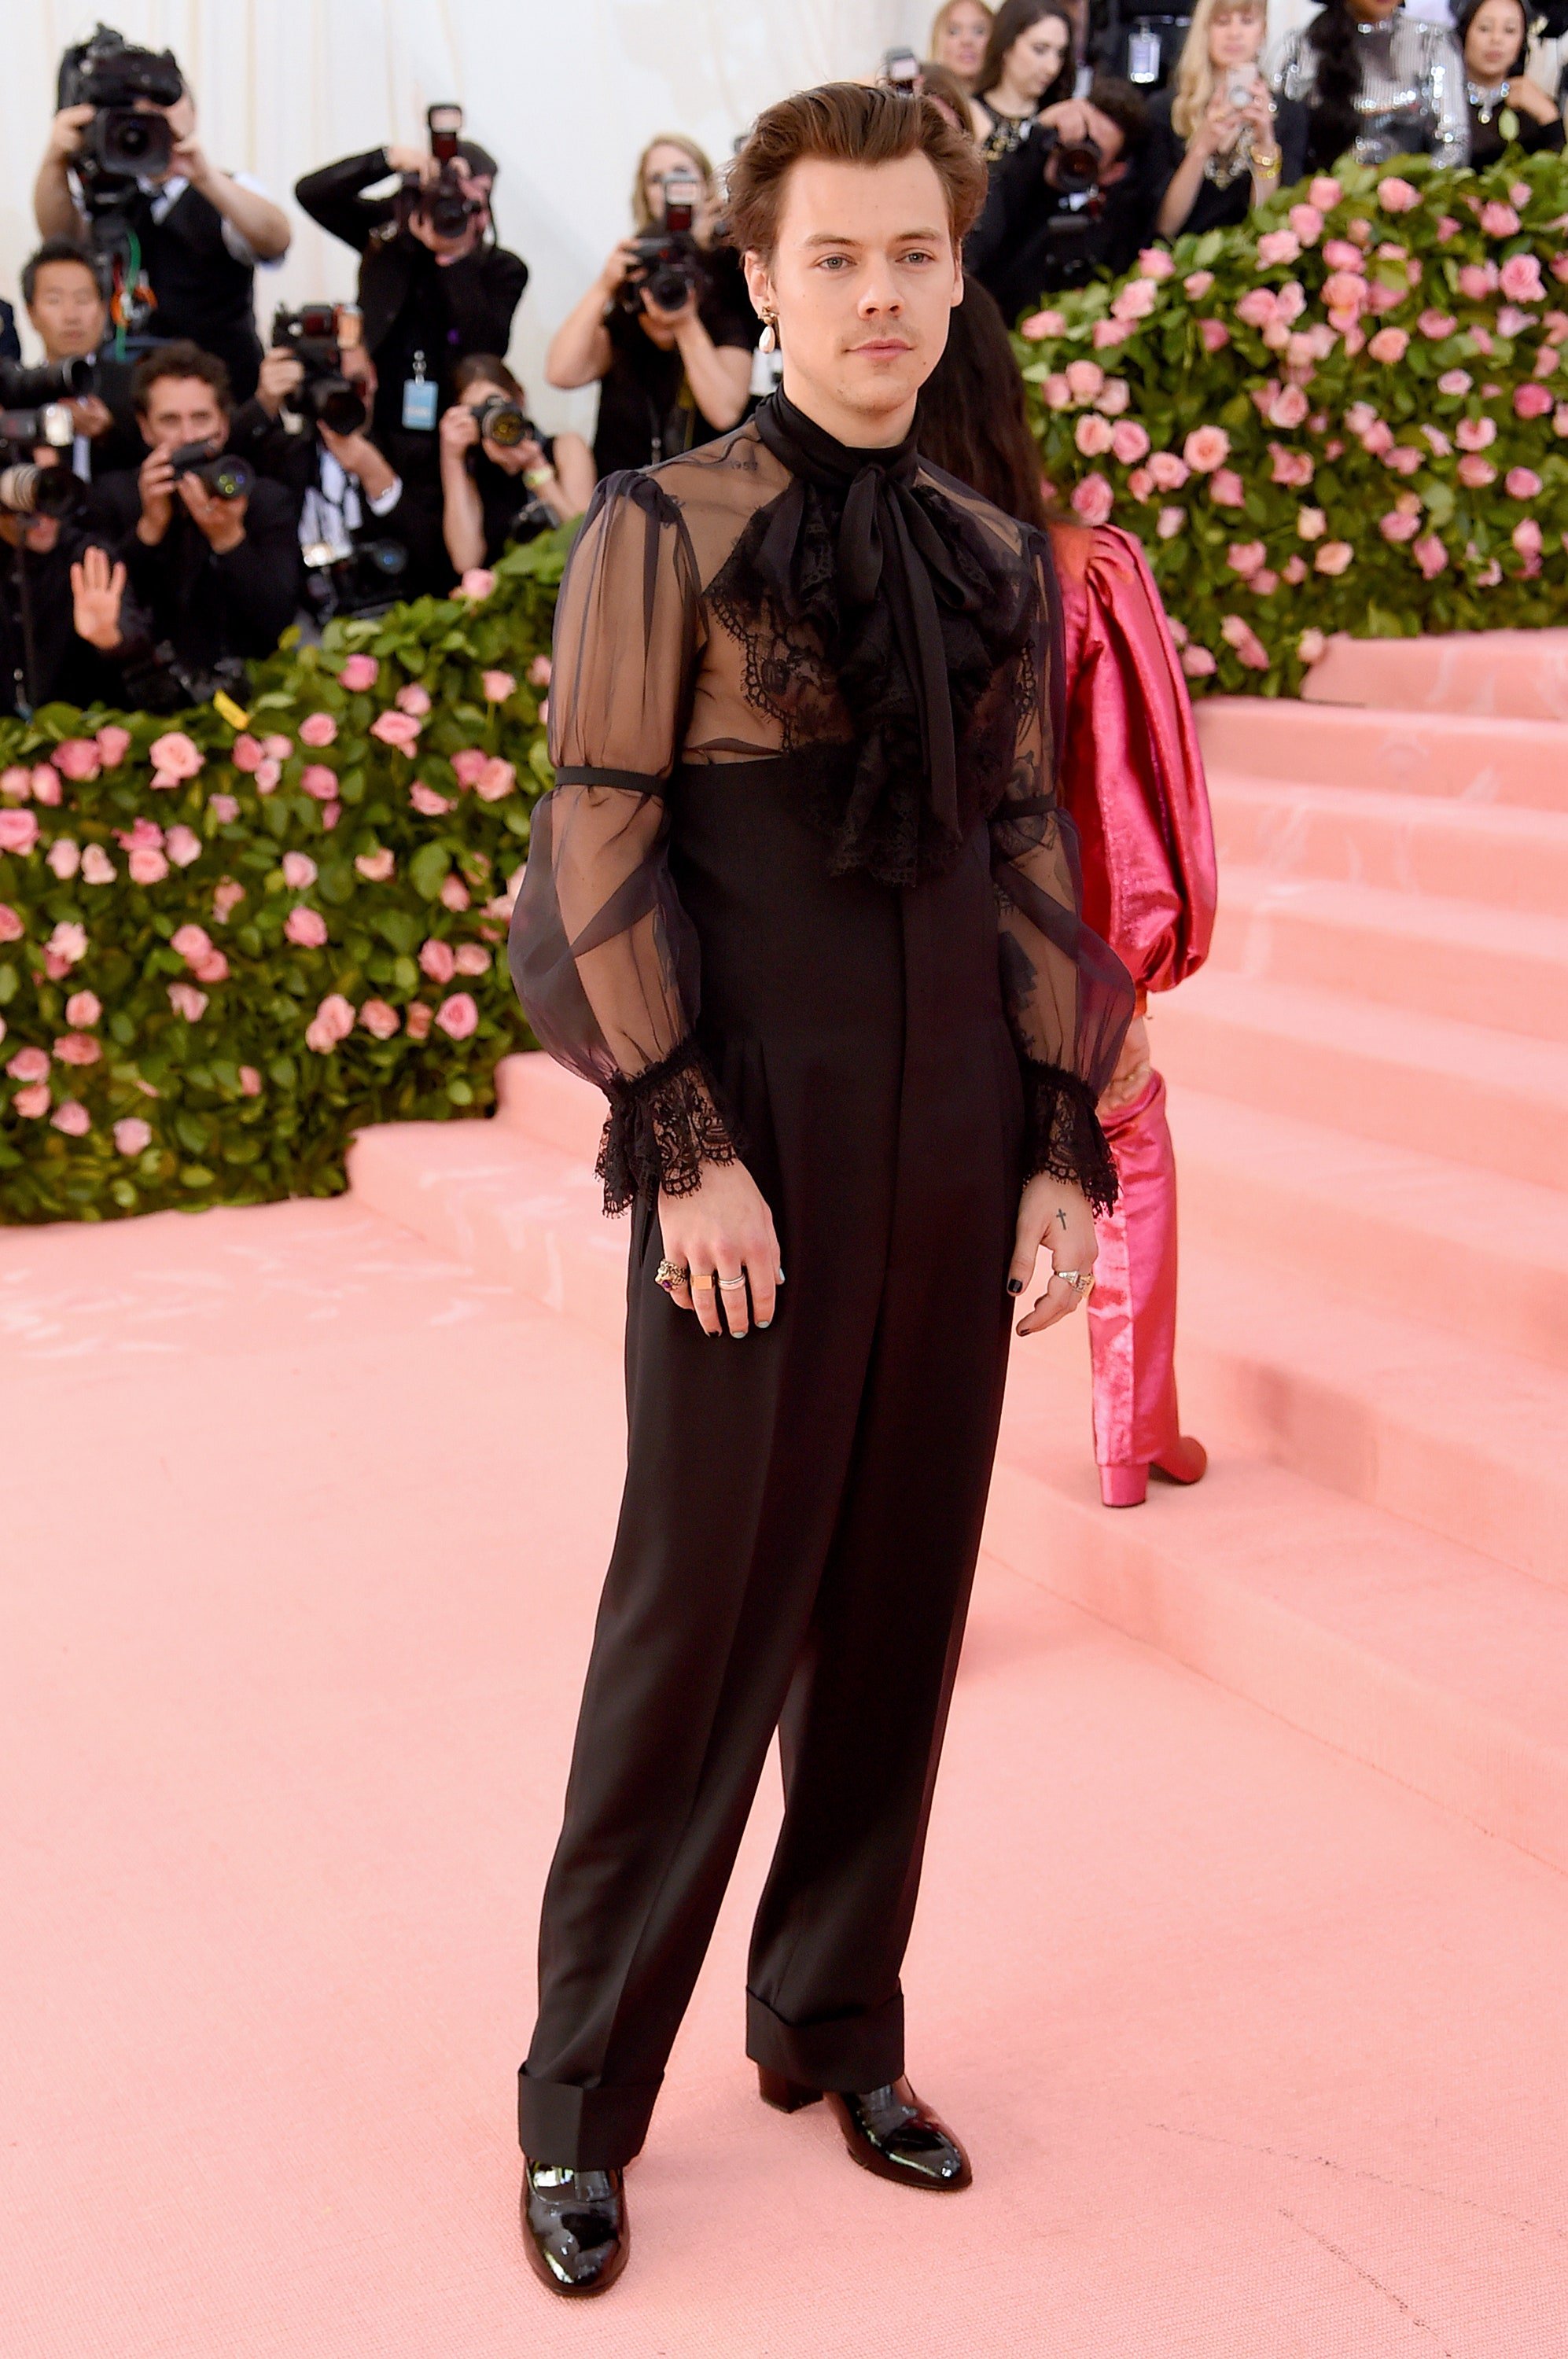 Harry Styles in Gucci at the 2019 Met Gala